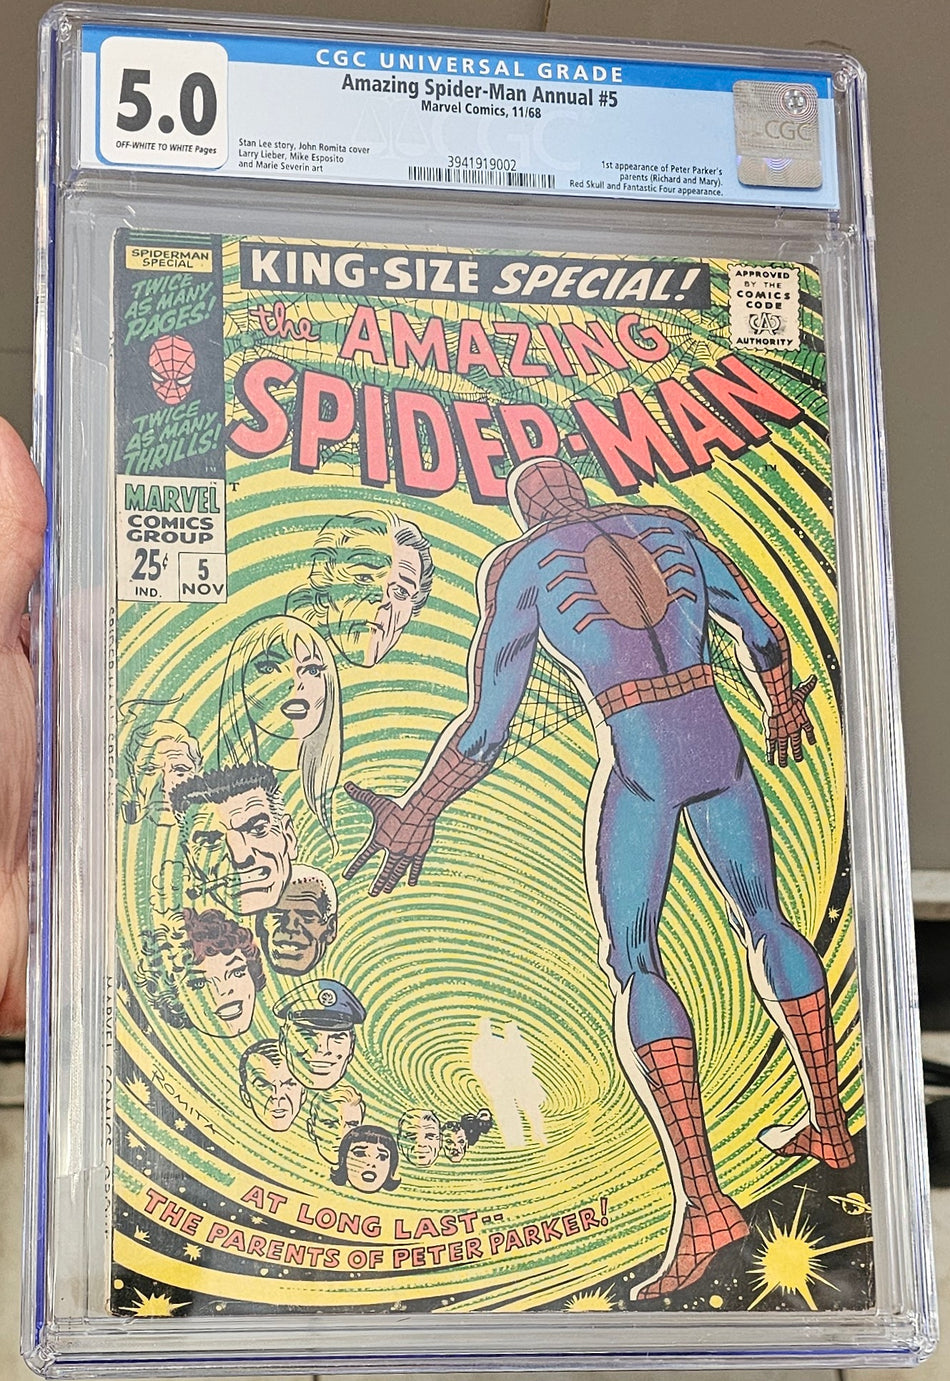 Amazing Spider-Man #5 CGC 5.0 (1st Appearance of Peter Parker's Parents, Richard & Mary)